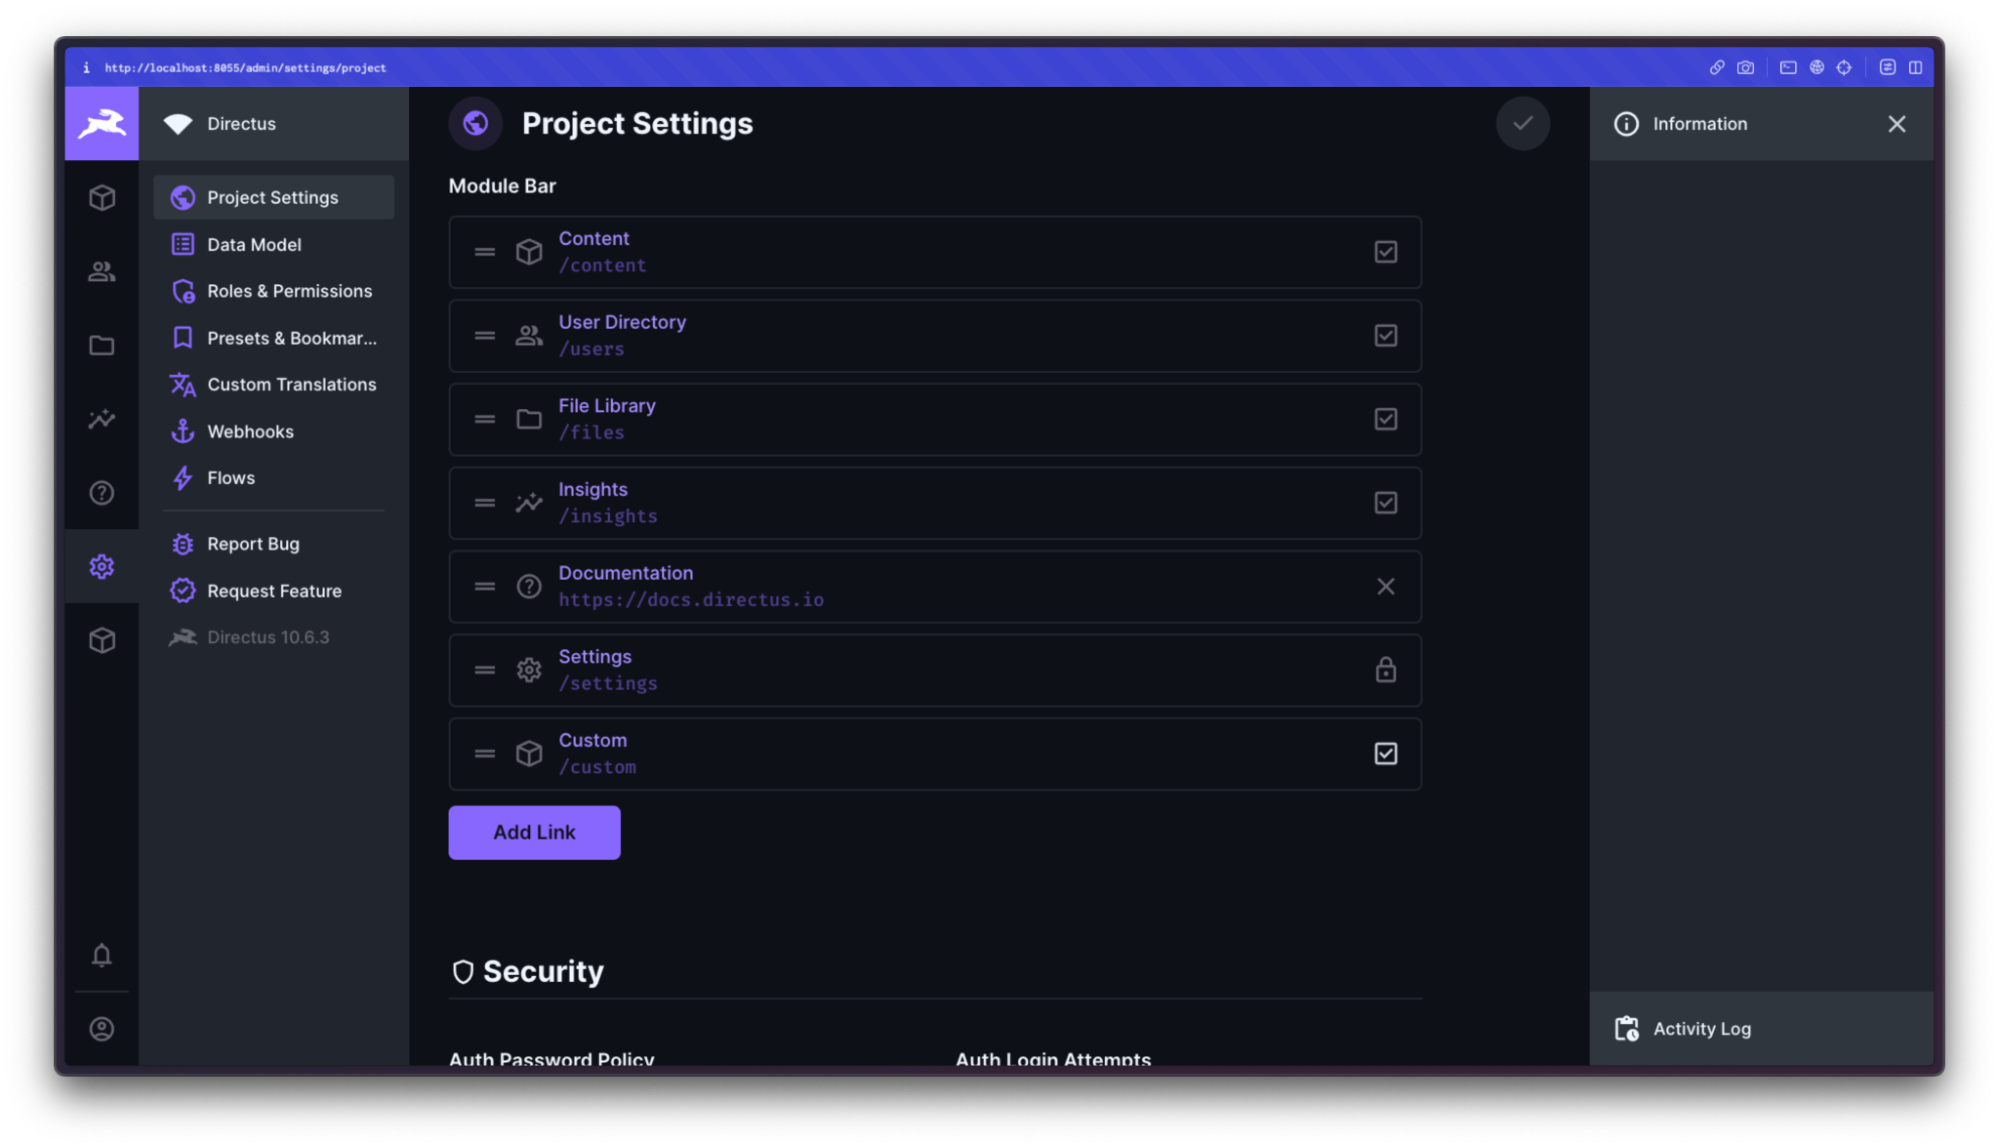 Project settings in Directus, showing the new custom module available.